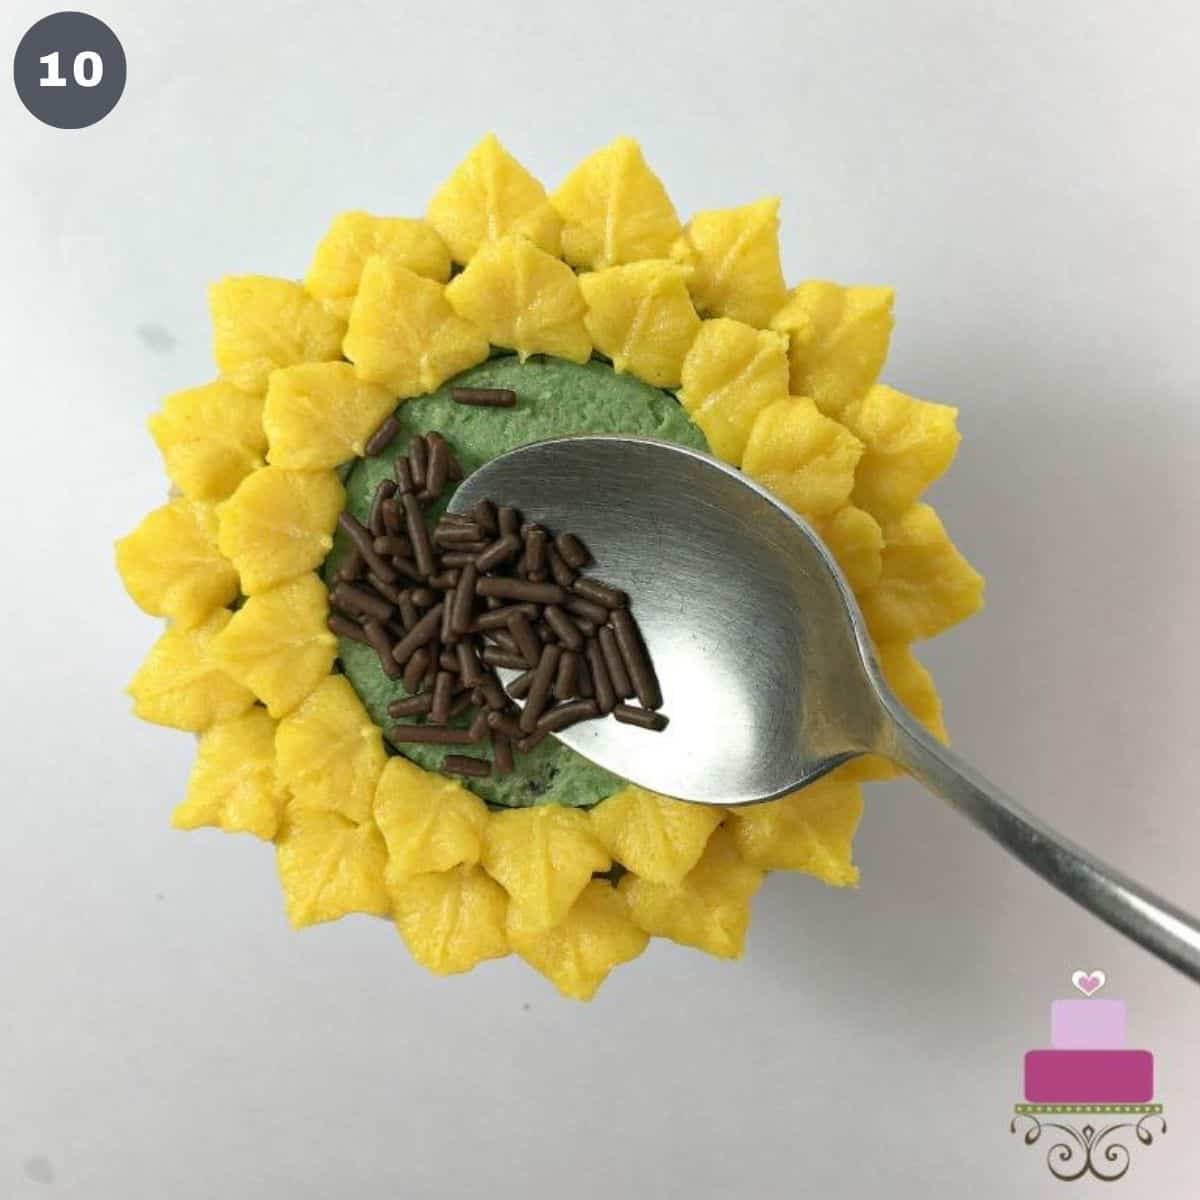 Adding chocolate sprinkles to the center of a sunflower cupcake.